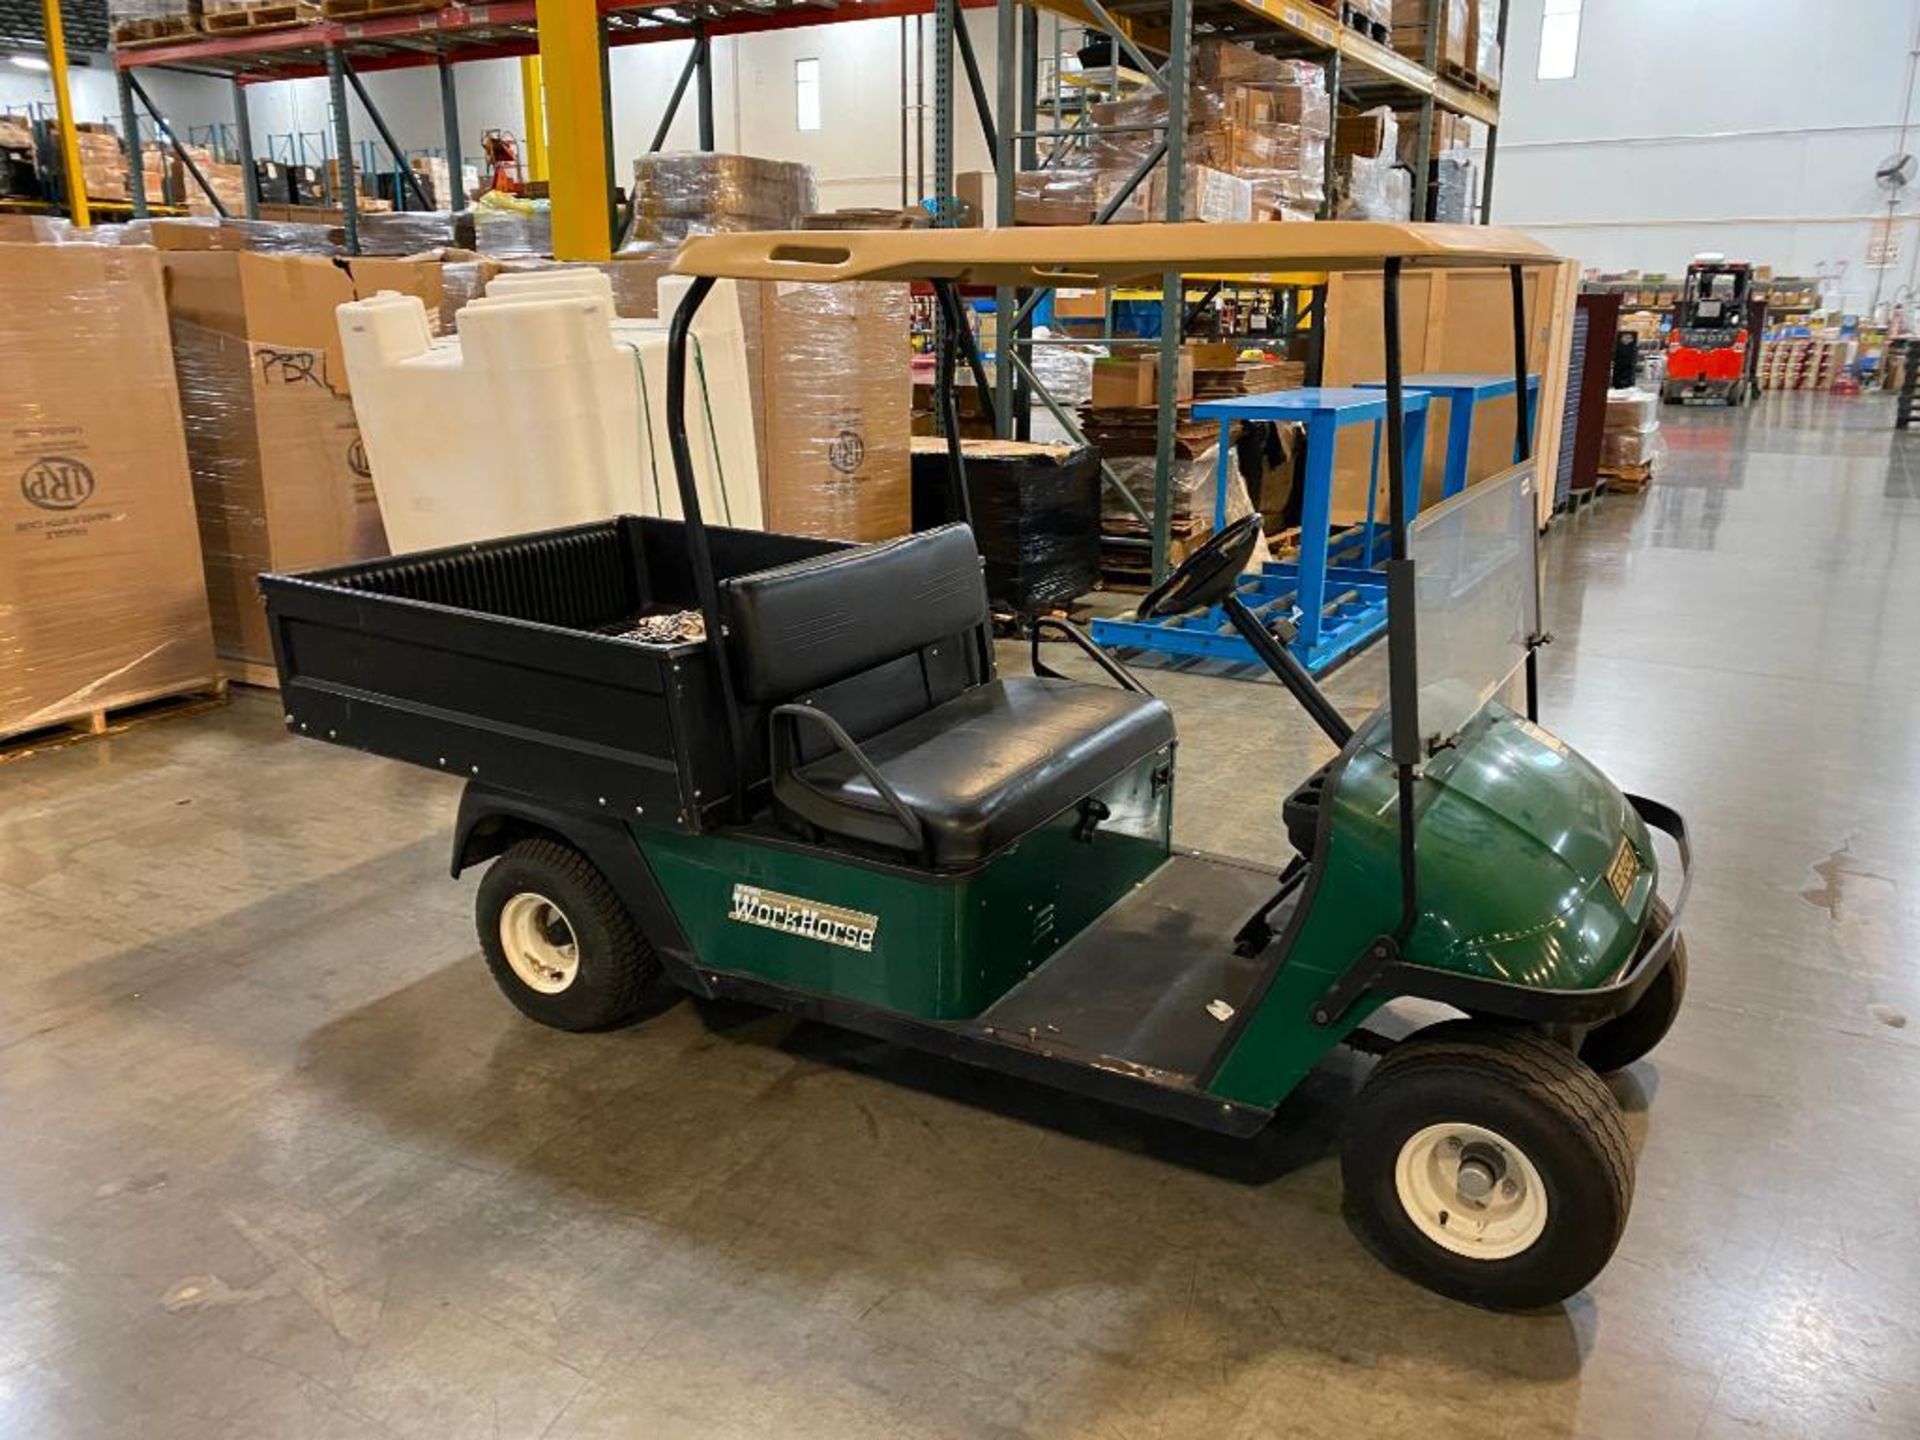 EZ GO WORKHORSE 1200G GOLF CART, GAS, WITH DUMP BED - Image 3 of 7